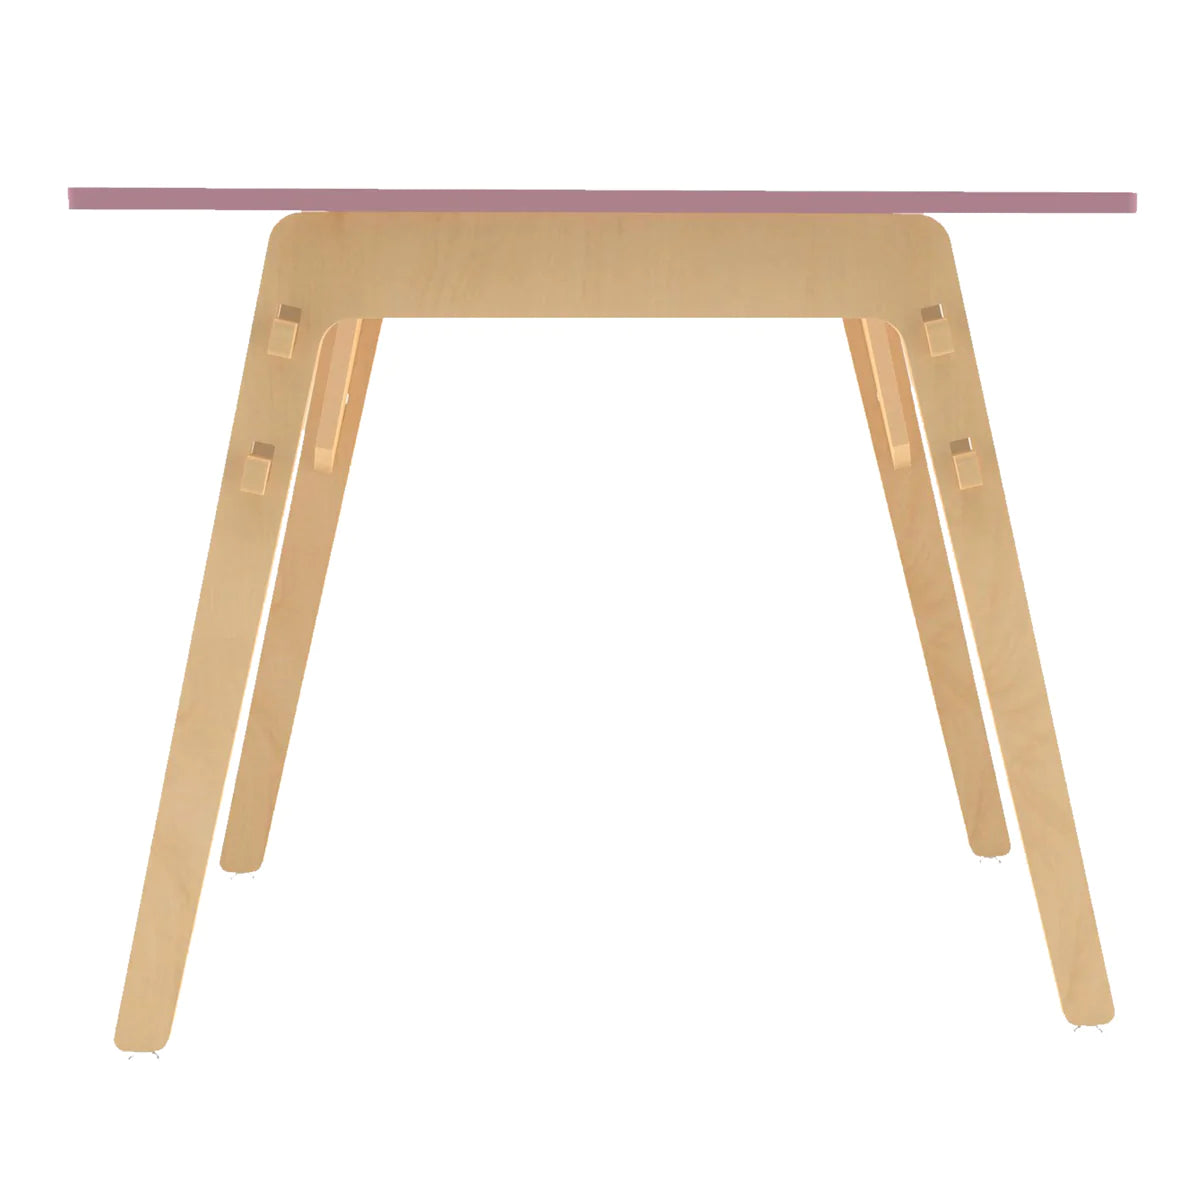 Buy Black Kiwi Wooden Table - Pink - Front View - SkilloToys.com